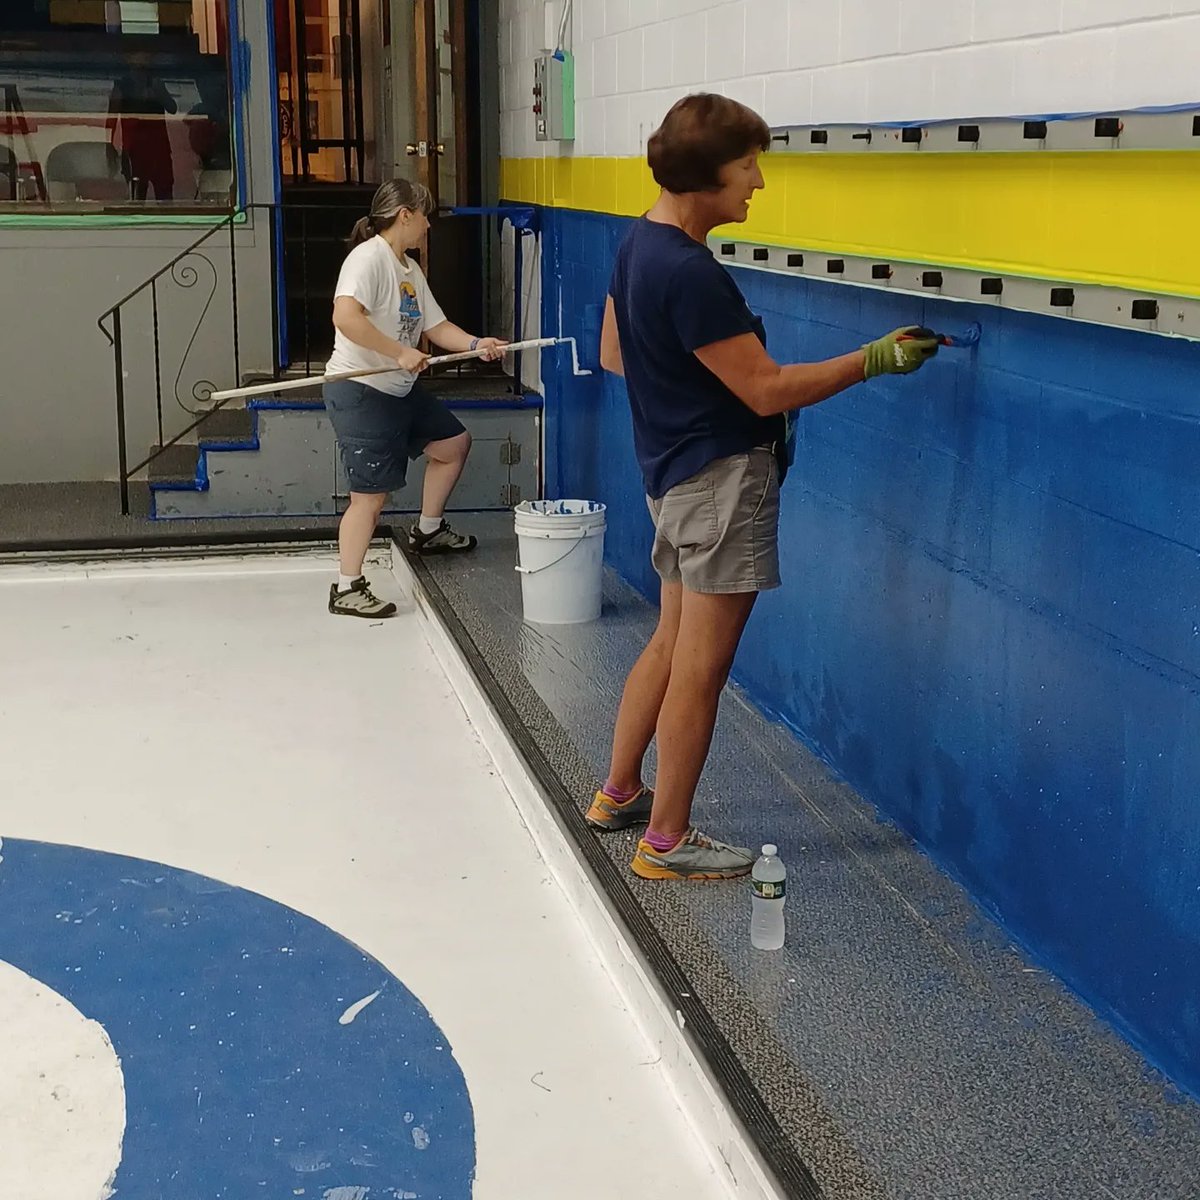 So we have a new look, but how did we get there? Of course, we start with thanking our club members who volunteered their time to help out! @GNCC_curling @usacurl #curling #fun #growthegame #renovation #newseason 🥌🧹🏠